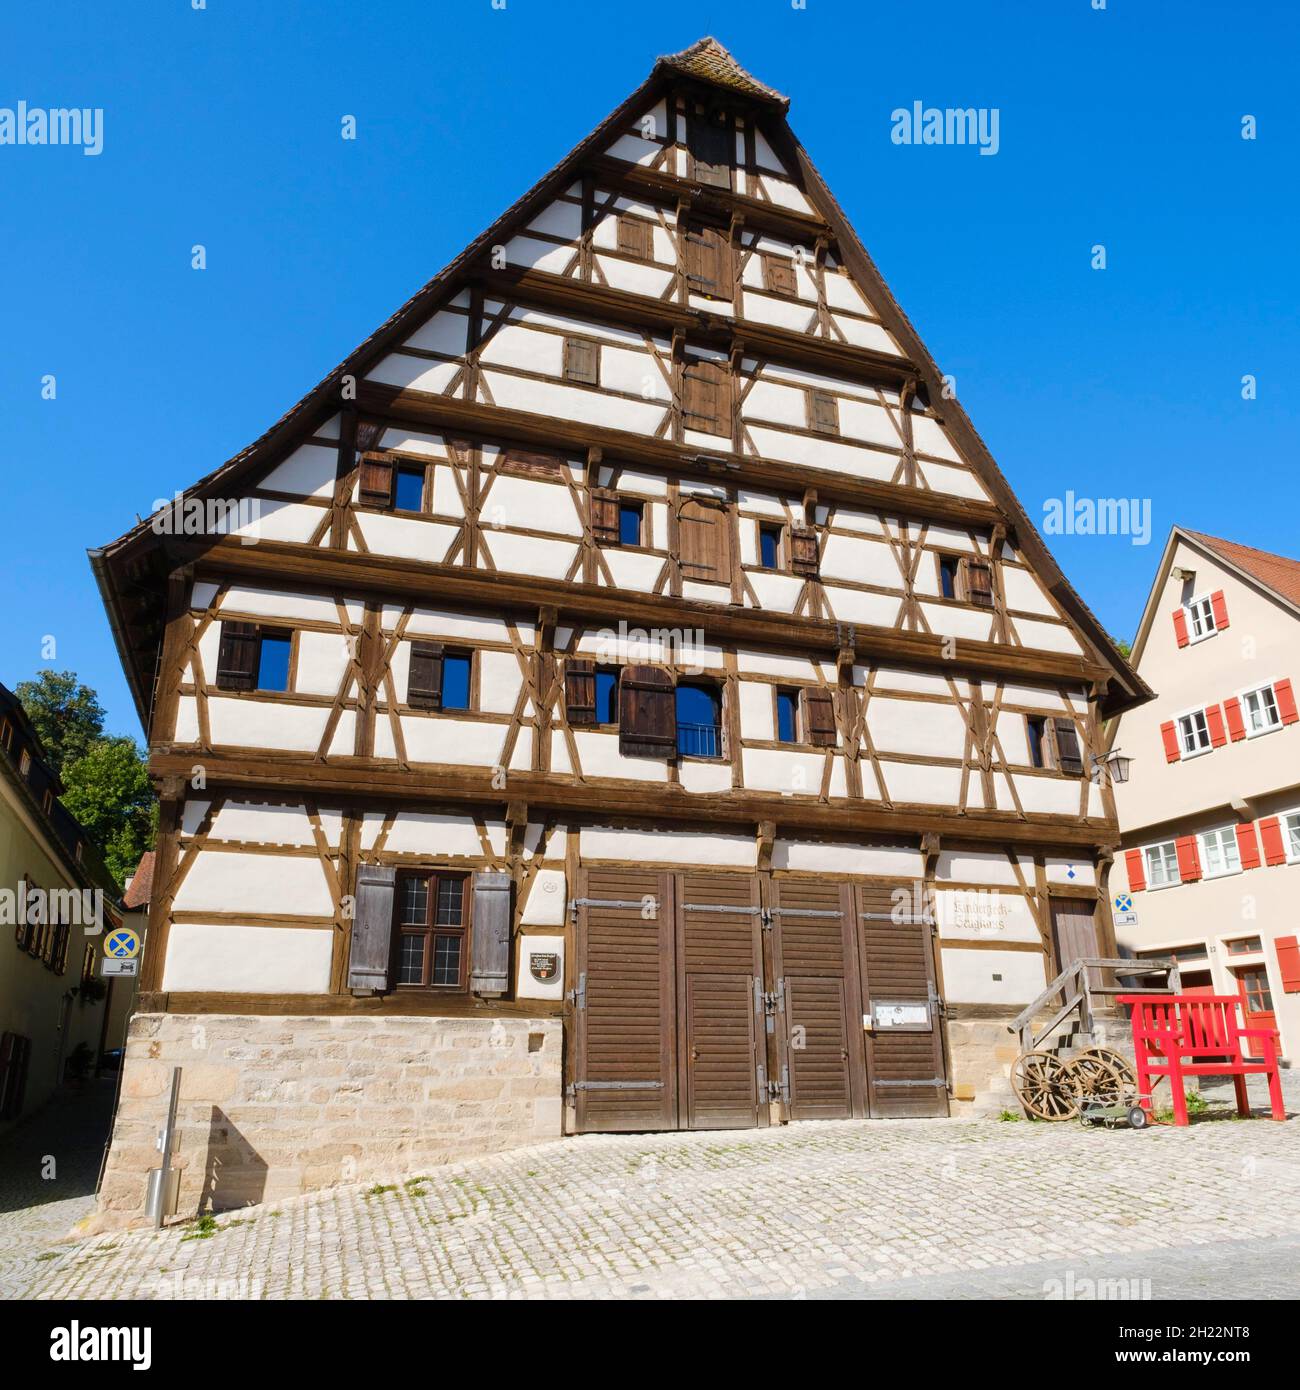 Kinderzech Zeughaus, former granary in the historic old town, Dinkelsbuehl, Middle Franconia, Bavaria, Germany Stock Photo